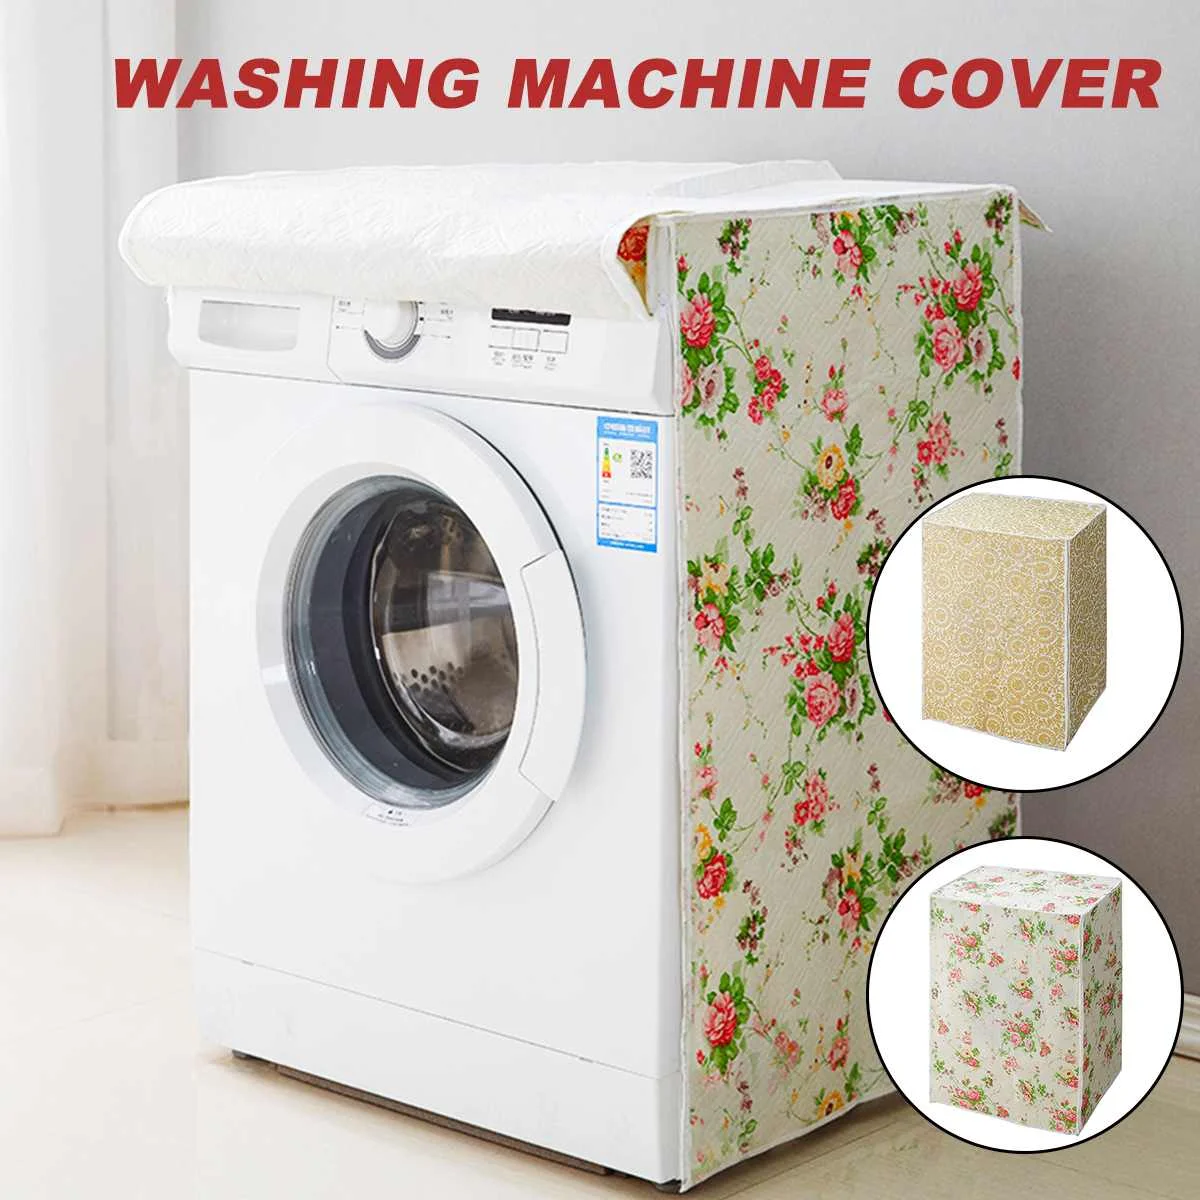 Washing Machine Cover Laundry Dryer Protect Dustproof Waterproof Sunscreen Cover